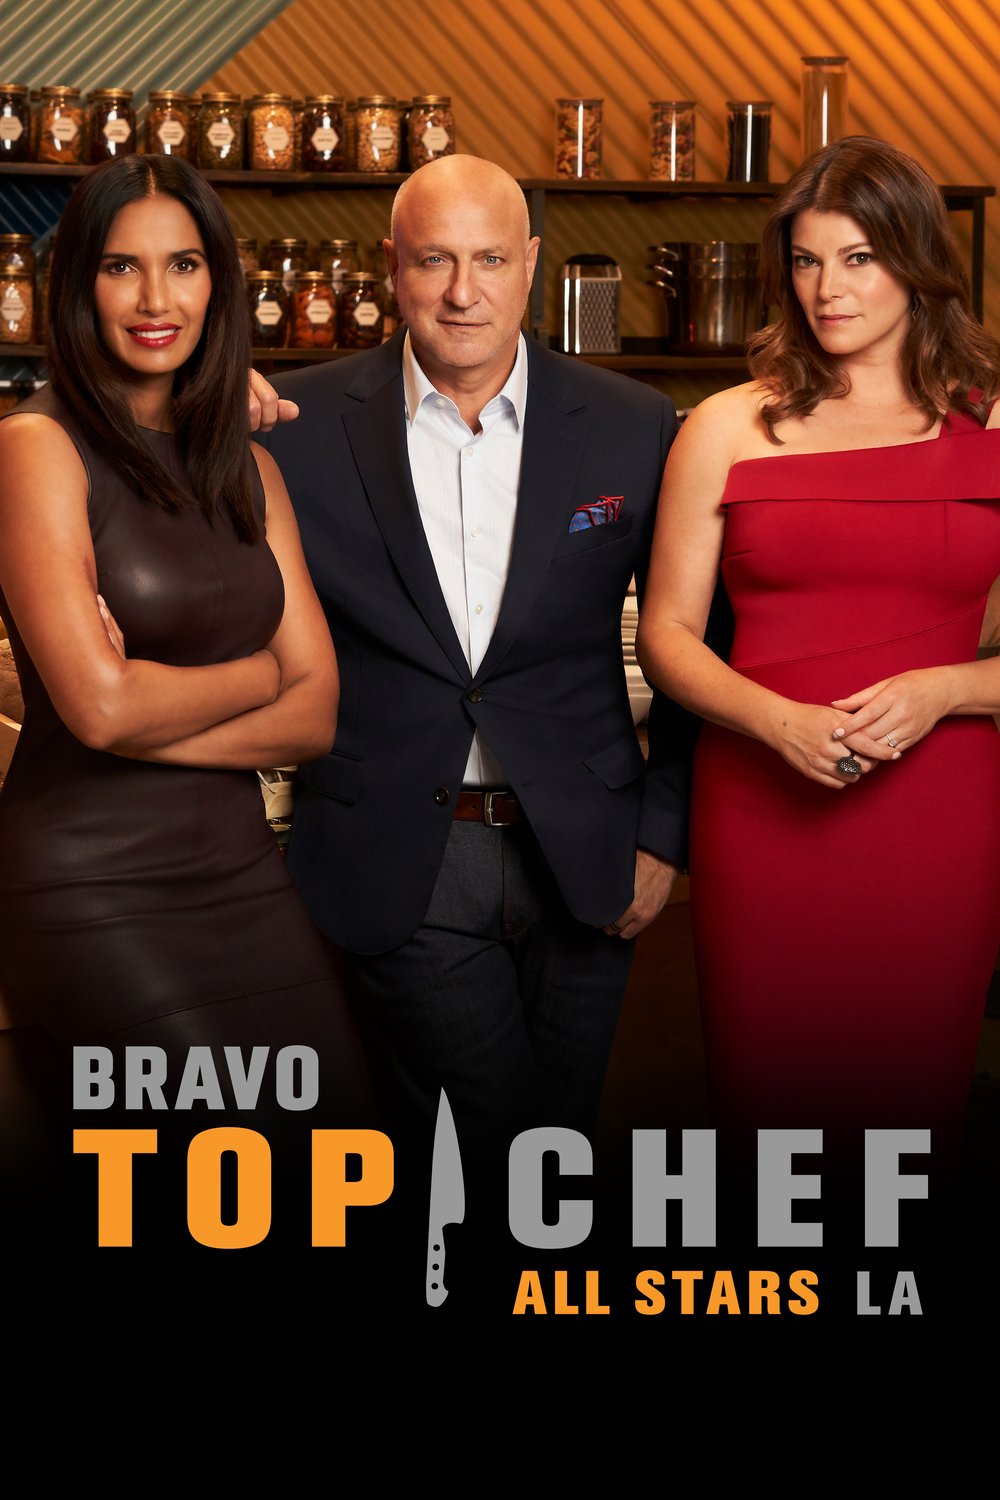 Poster of the movie Top Chef